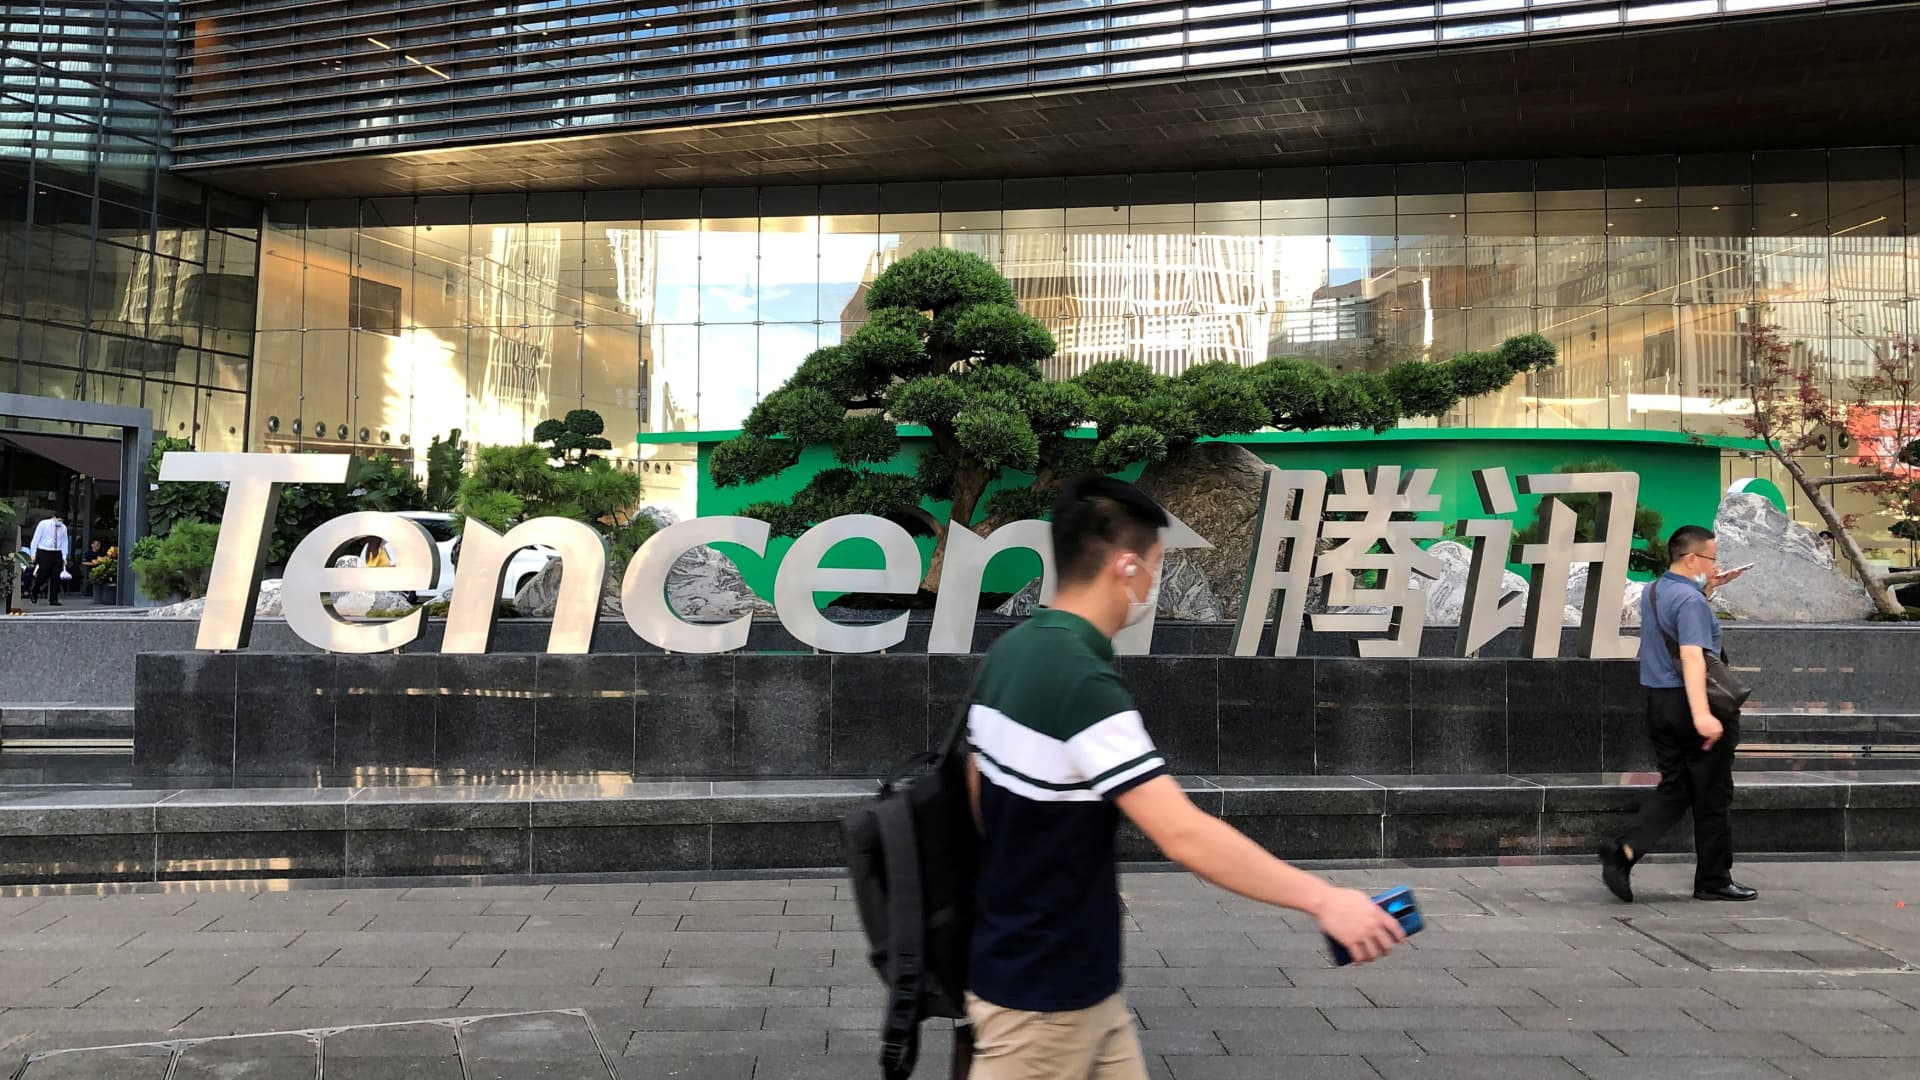 China’s $370 billion tech giant Tencent could post its first revenue decline on record